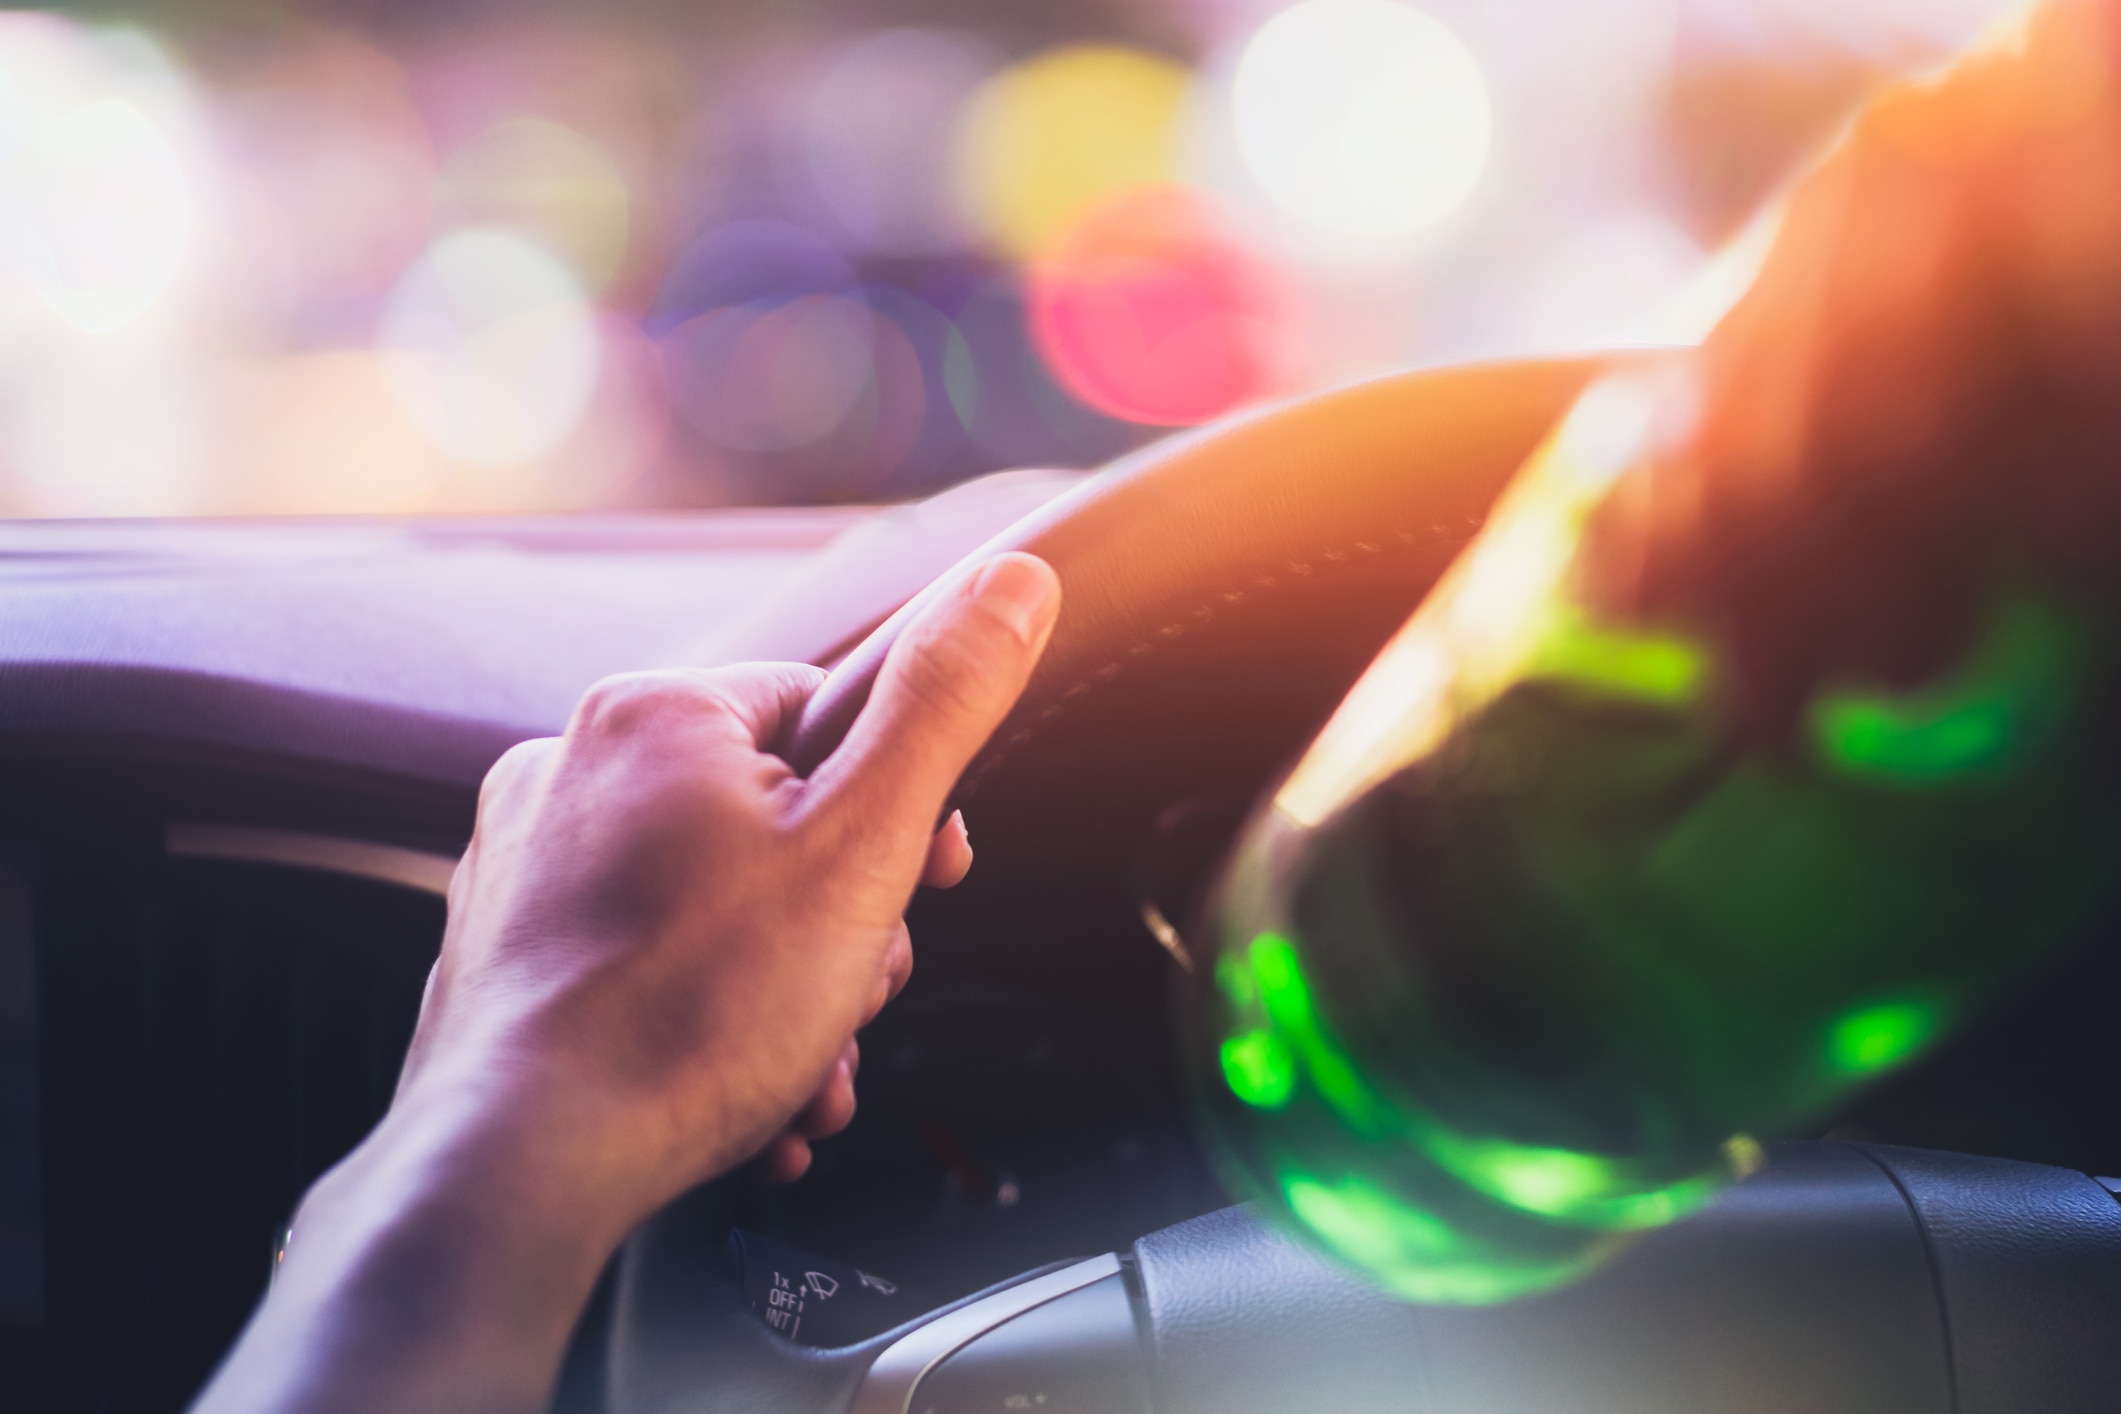 IS THERE A DRINK DRIVING LOOPHOLE?